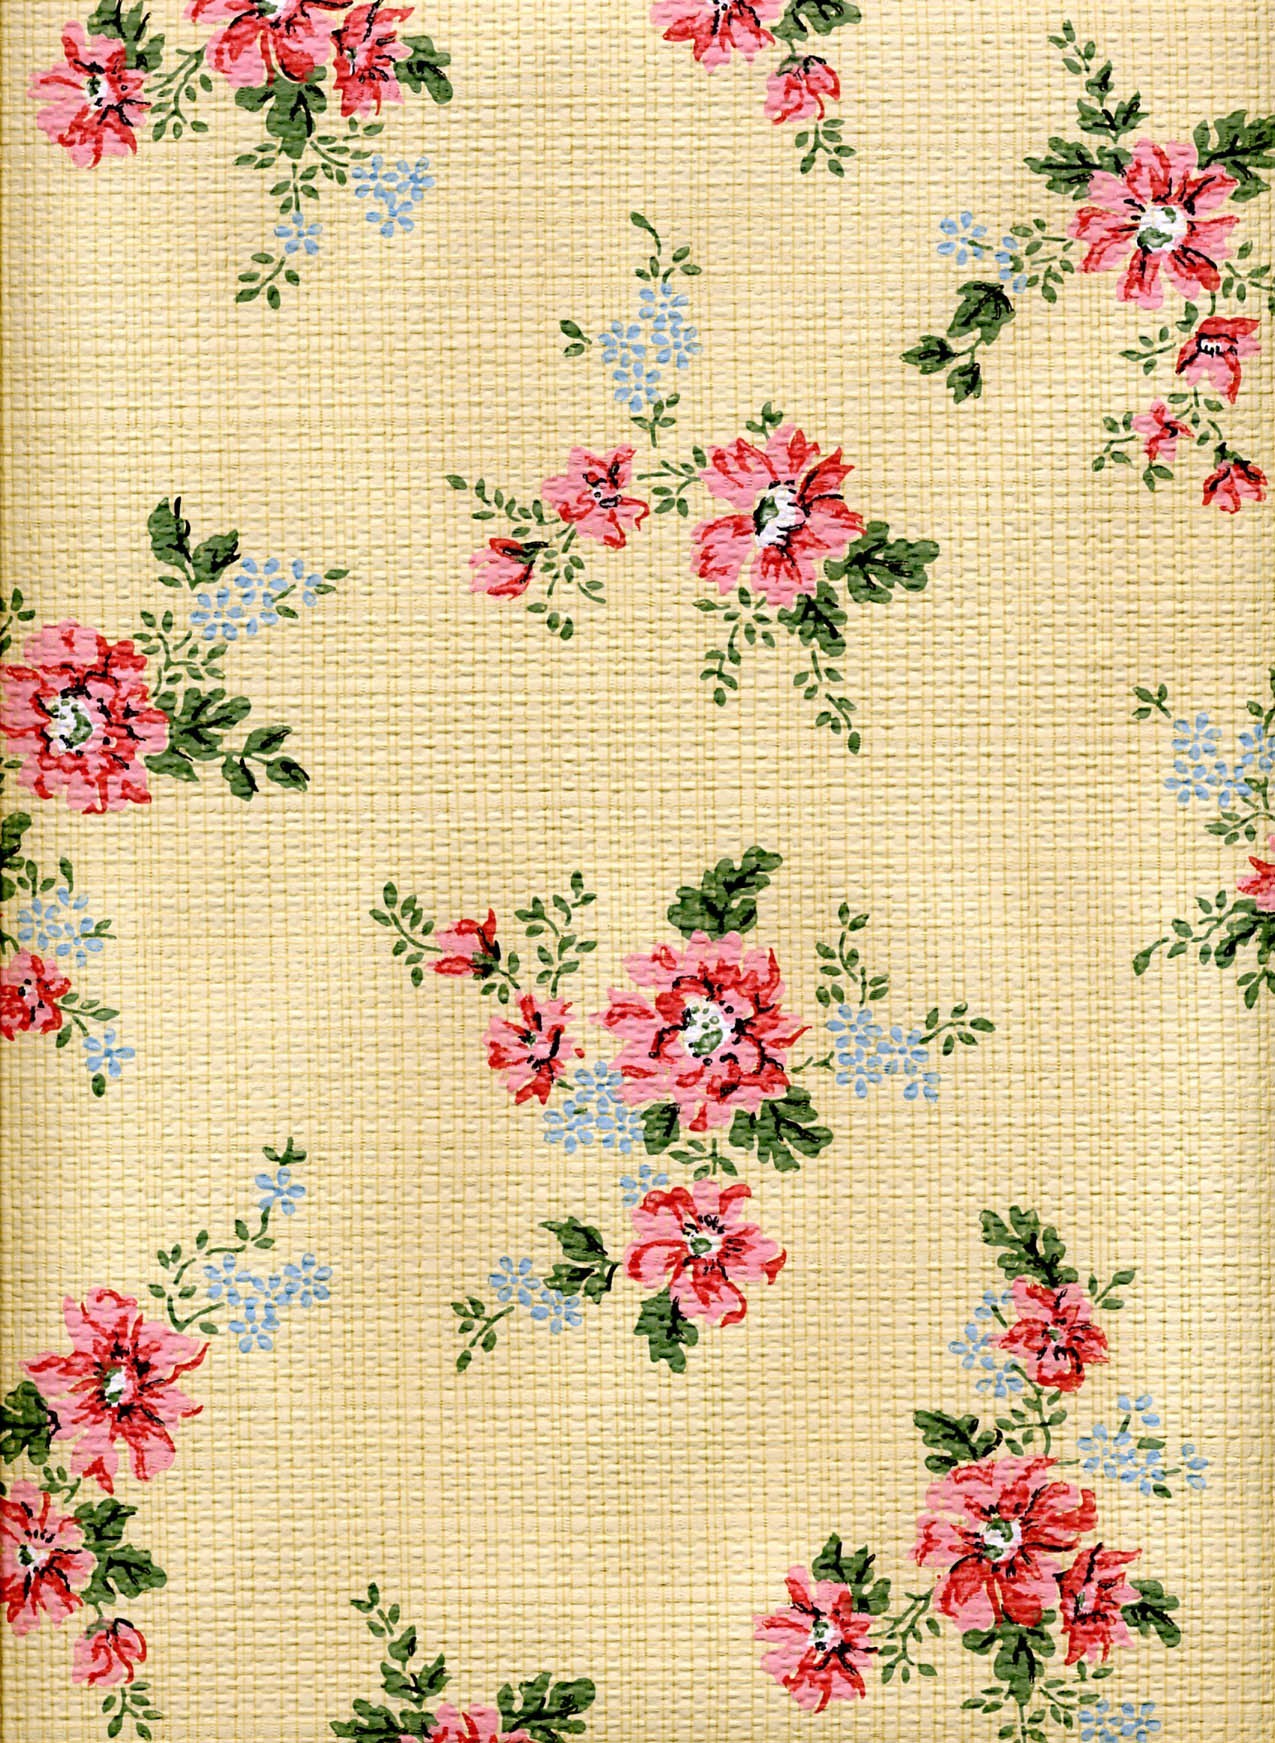 Feet of Vintage Cottage Wallpaper Shabby Chic by SnippetsofTime